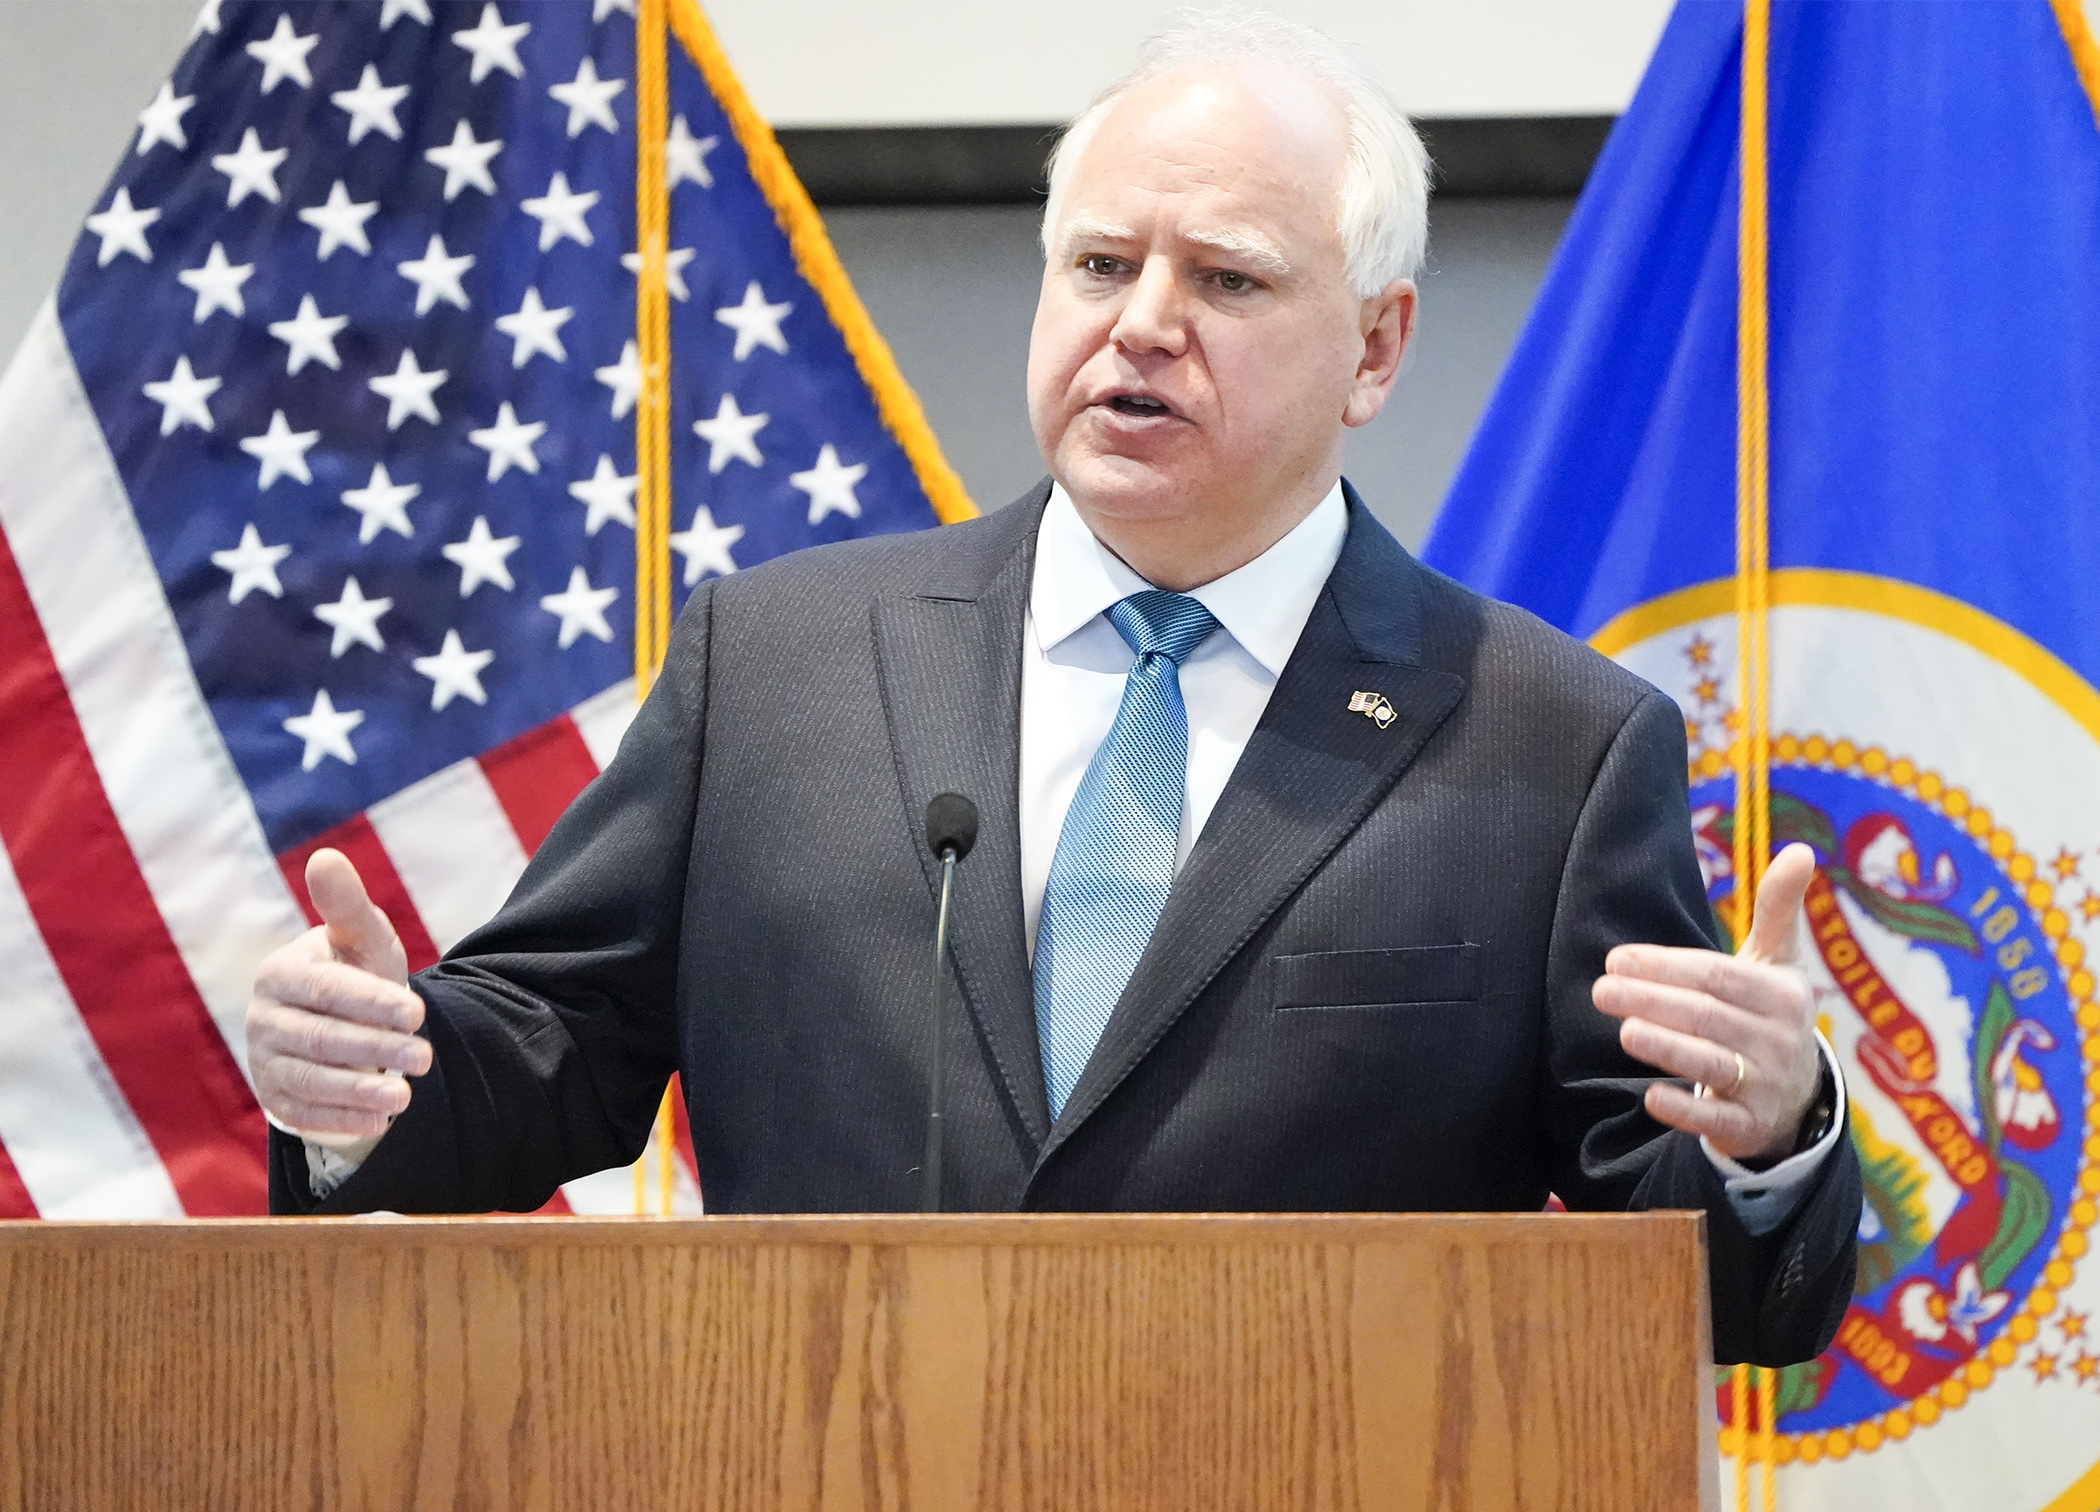 Gov. Tim Walz, pictured here last year, on Tuesday unveiled his complete $65.2 billion two-year state budget proposal he says will "make Minnesota the best state in the nation for children." (House Photography file photo)